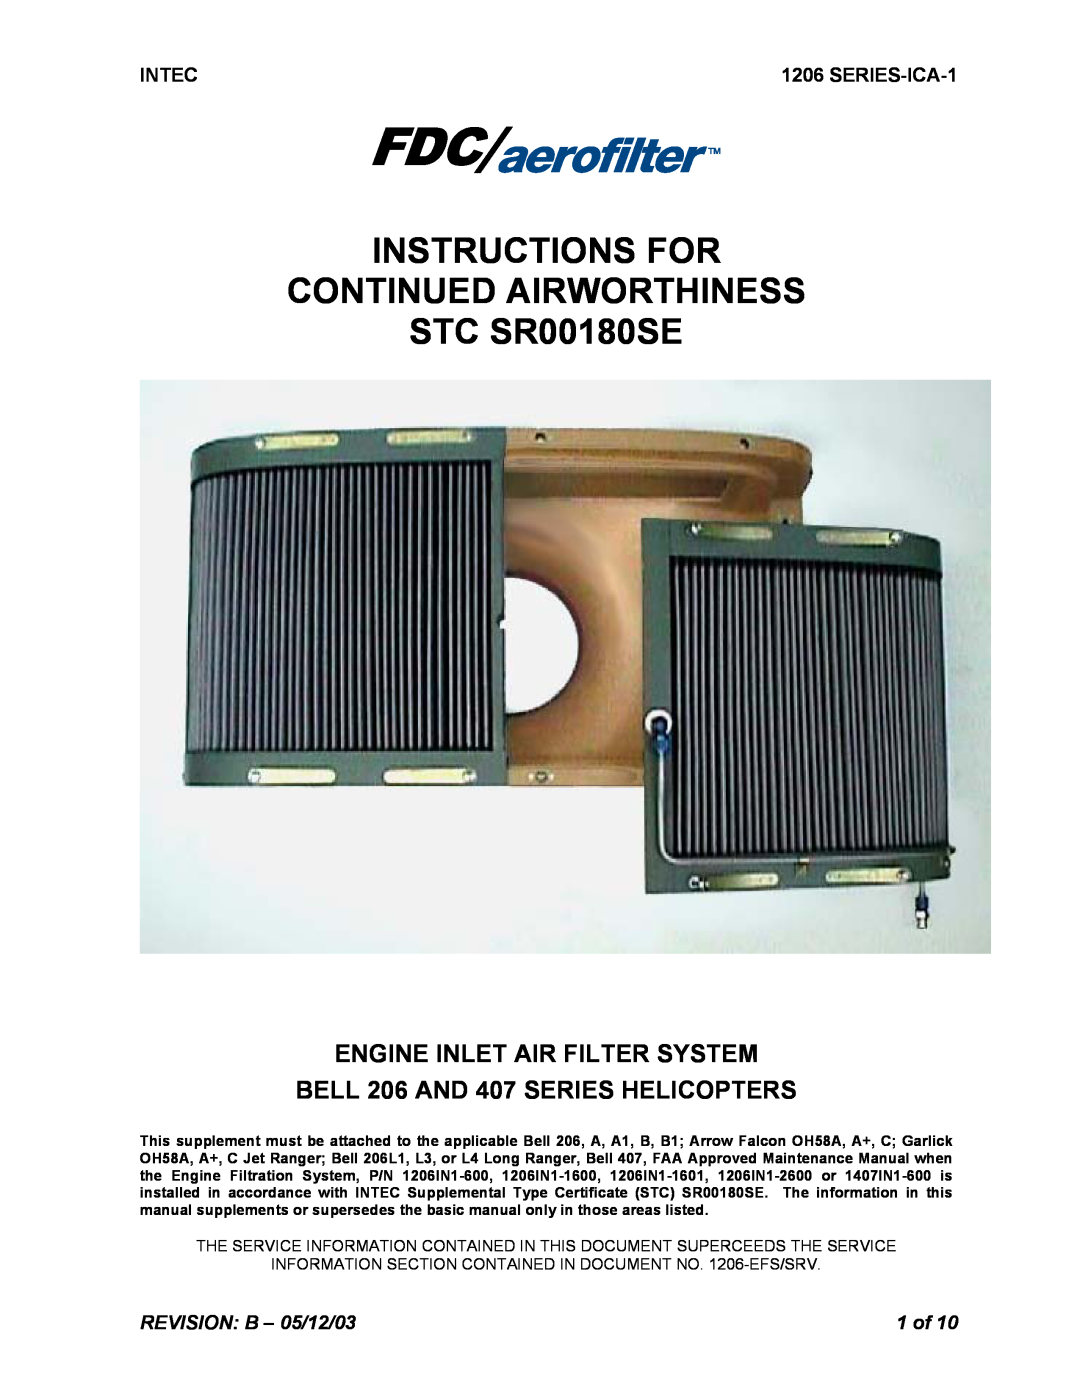 Intec STC SR00180SE manual Instructions For Continued Airworthiness, Engine Inlet Air Filter System 